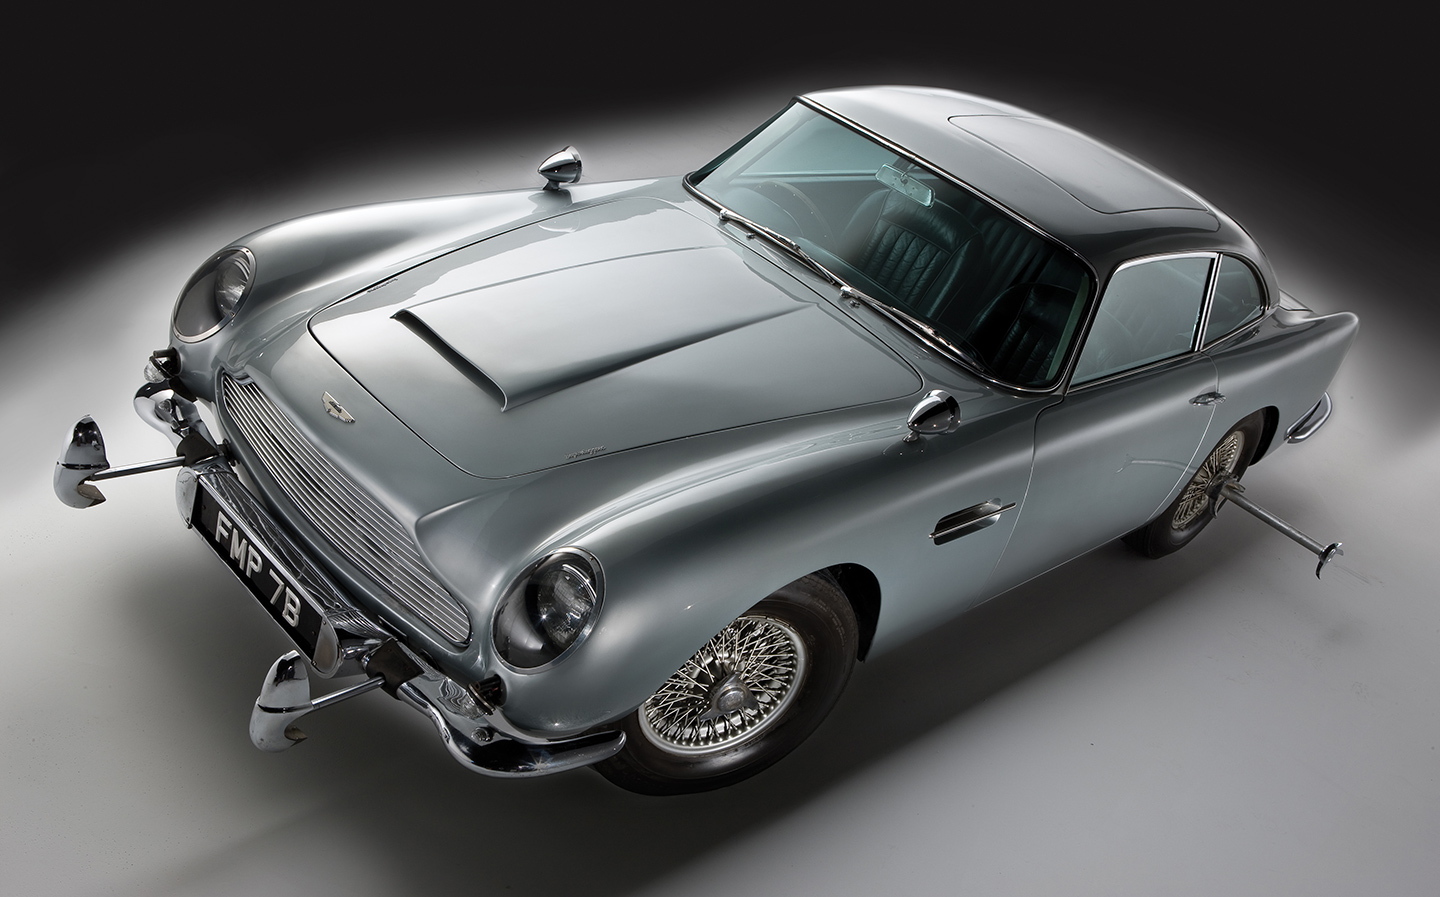 Aston Martin to build Goldfinger-spec DB5s — complete with "gadgets and armaments"